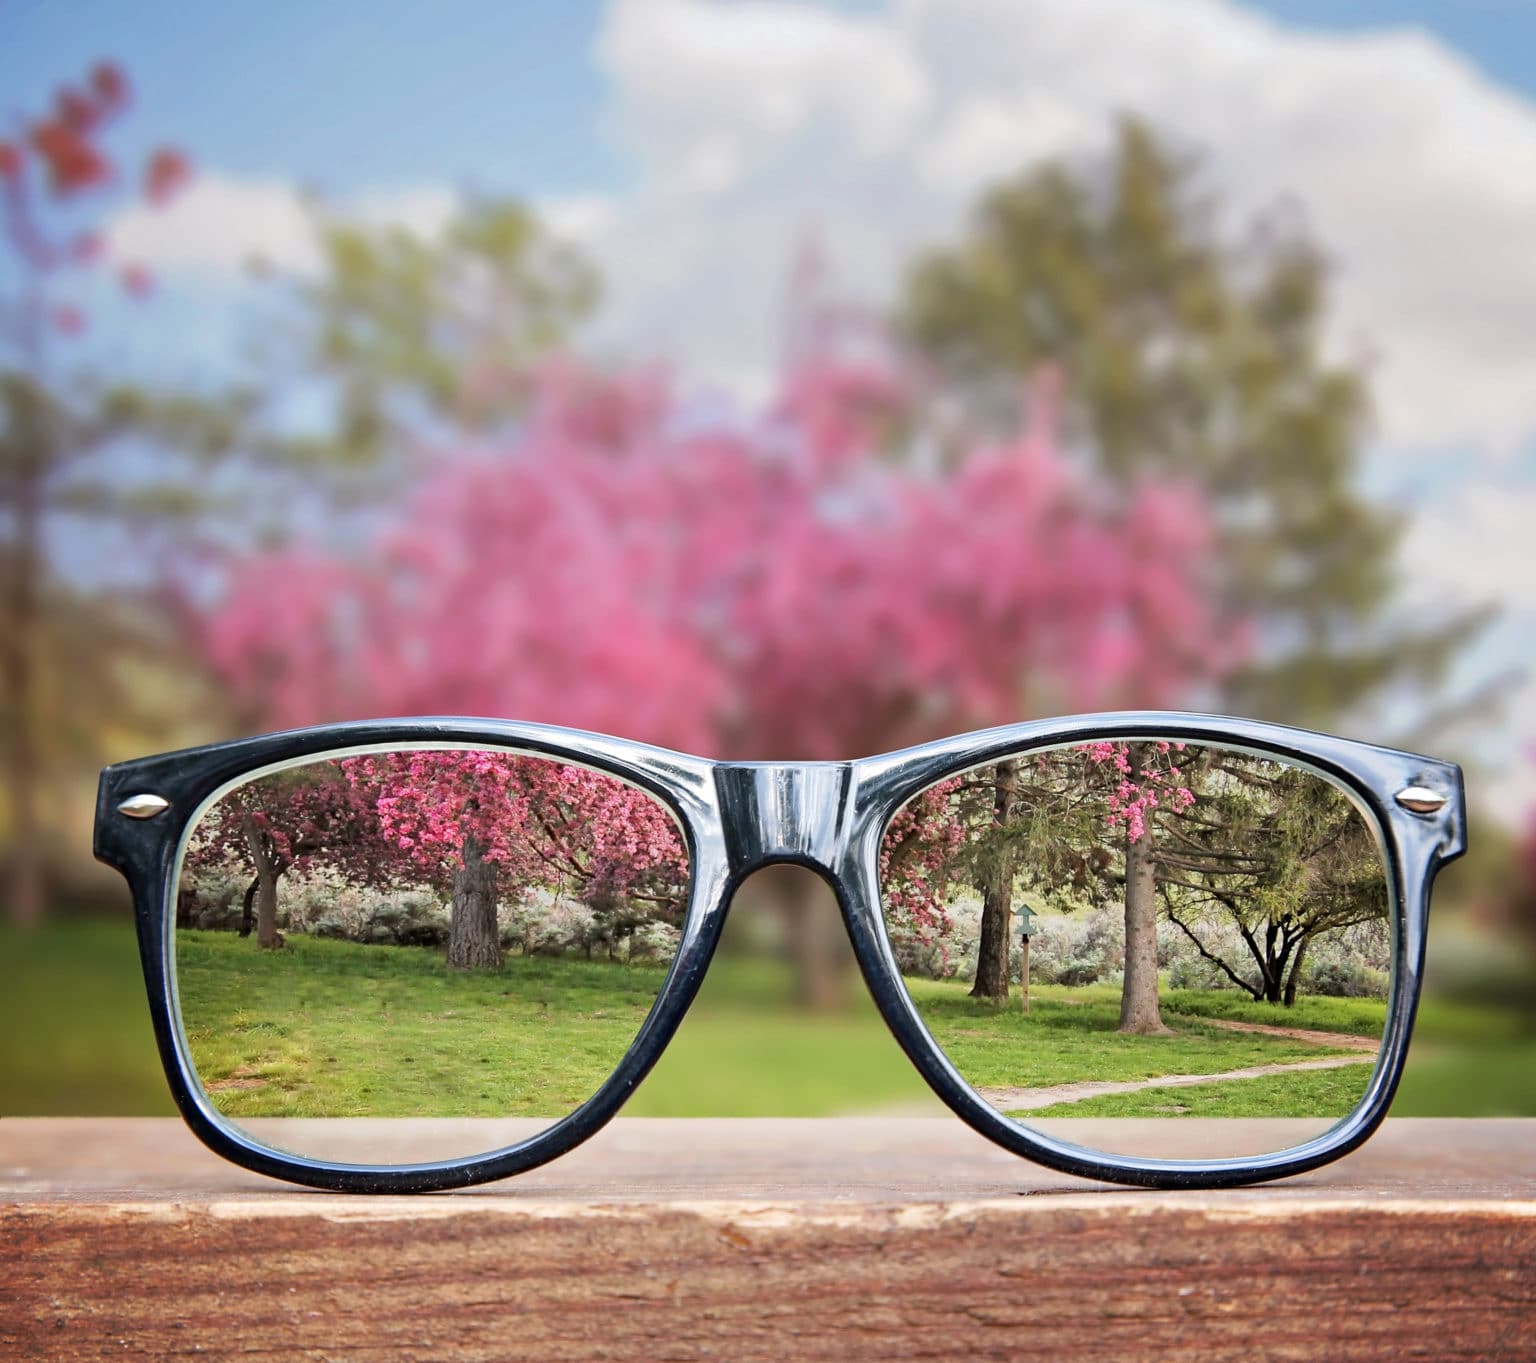 A Guide To Selecting the Best Sports Prescription Glasses